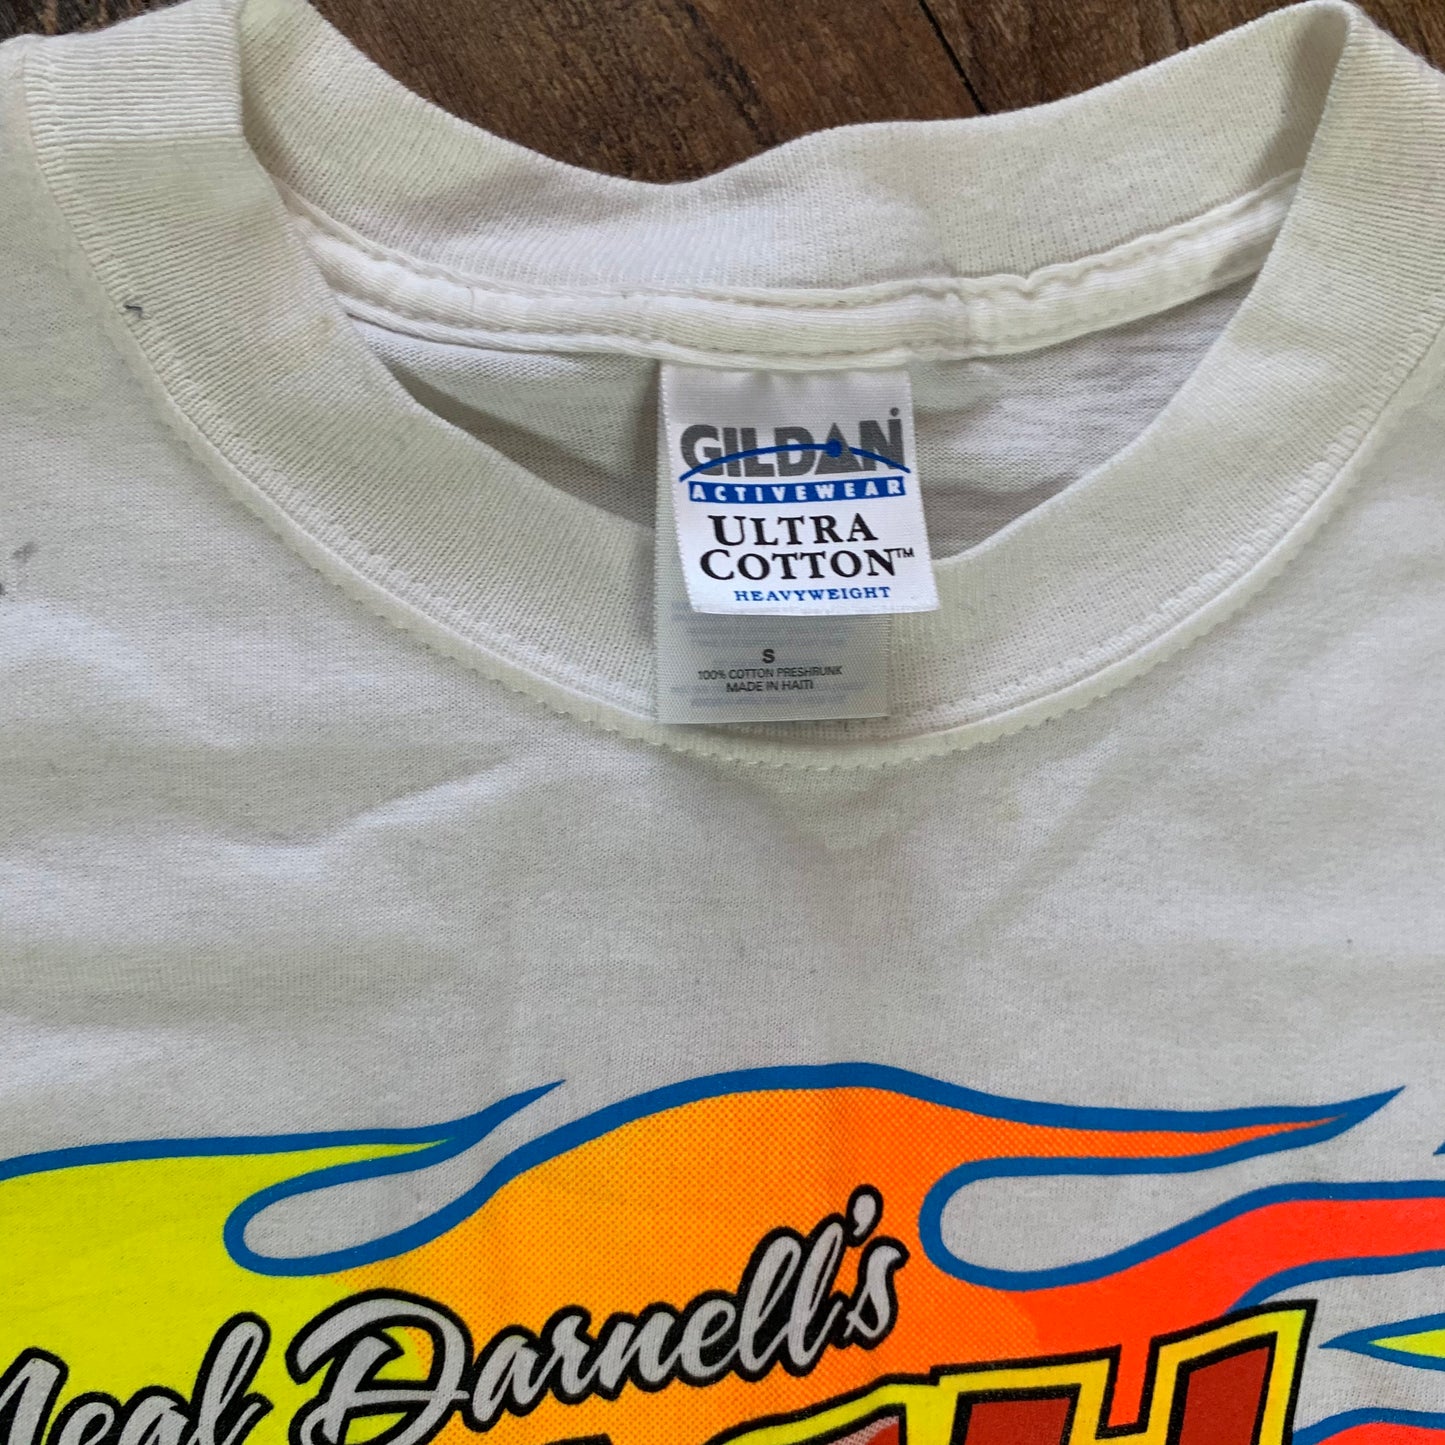 Neal Darnell's autographed race Truck Vintage tee